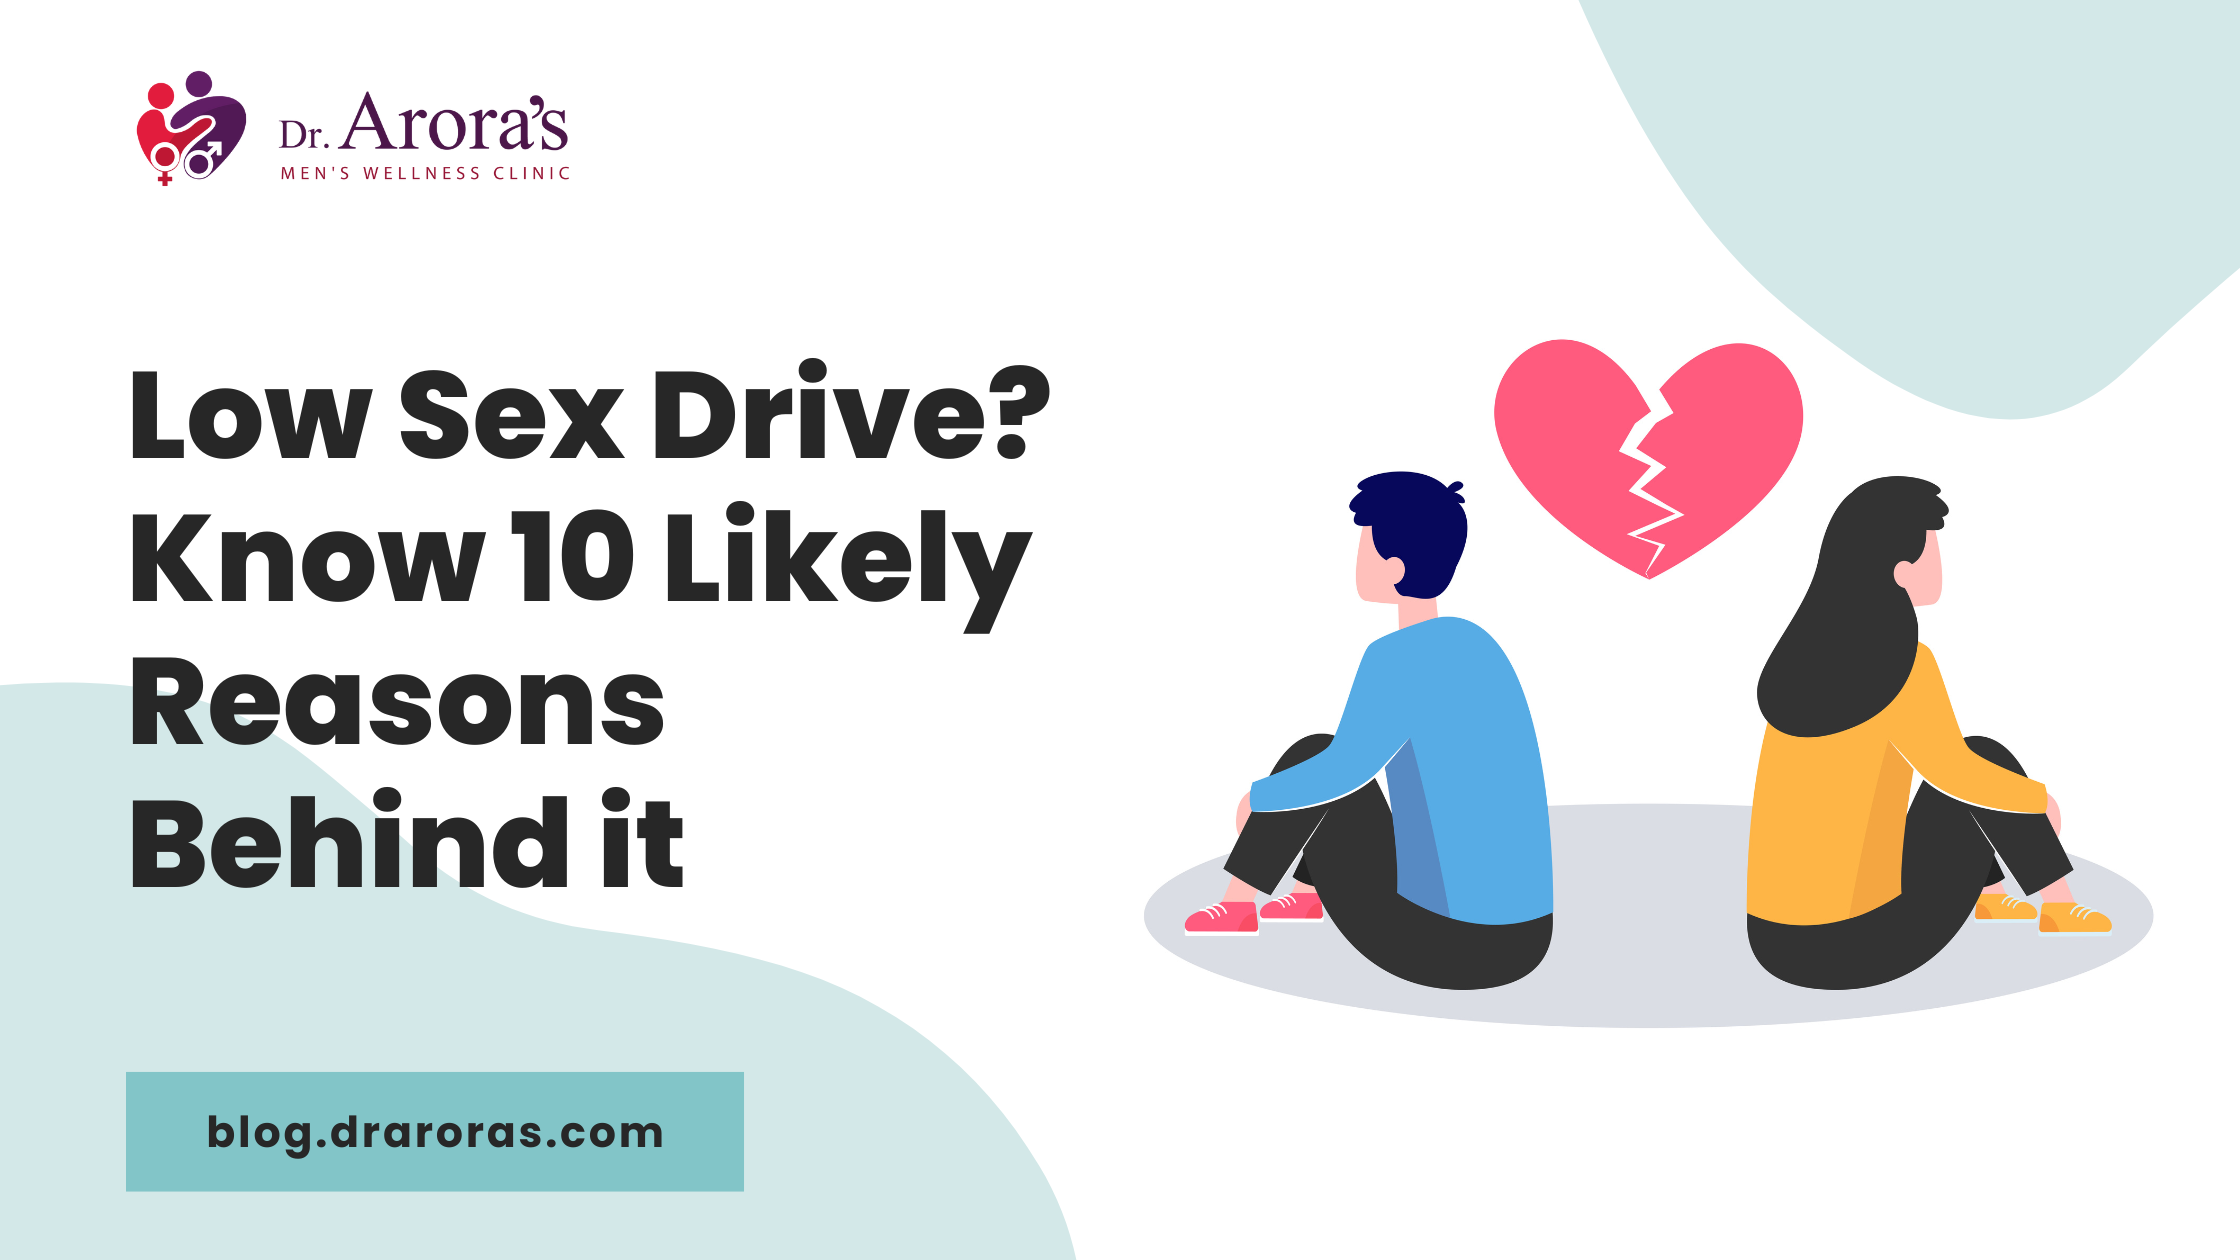 Low Sex Drive? Know 10 Likely Reasons Behind It